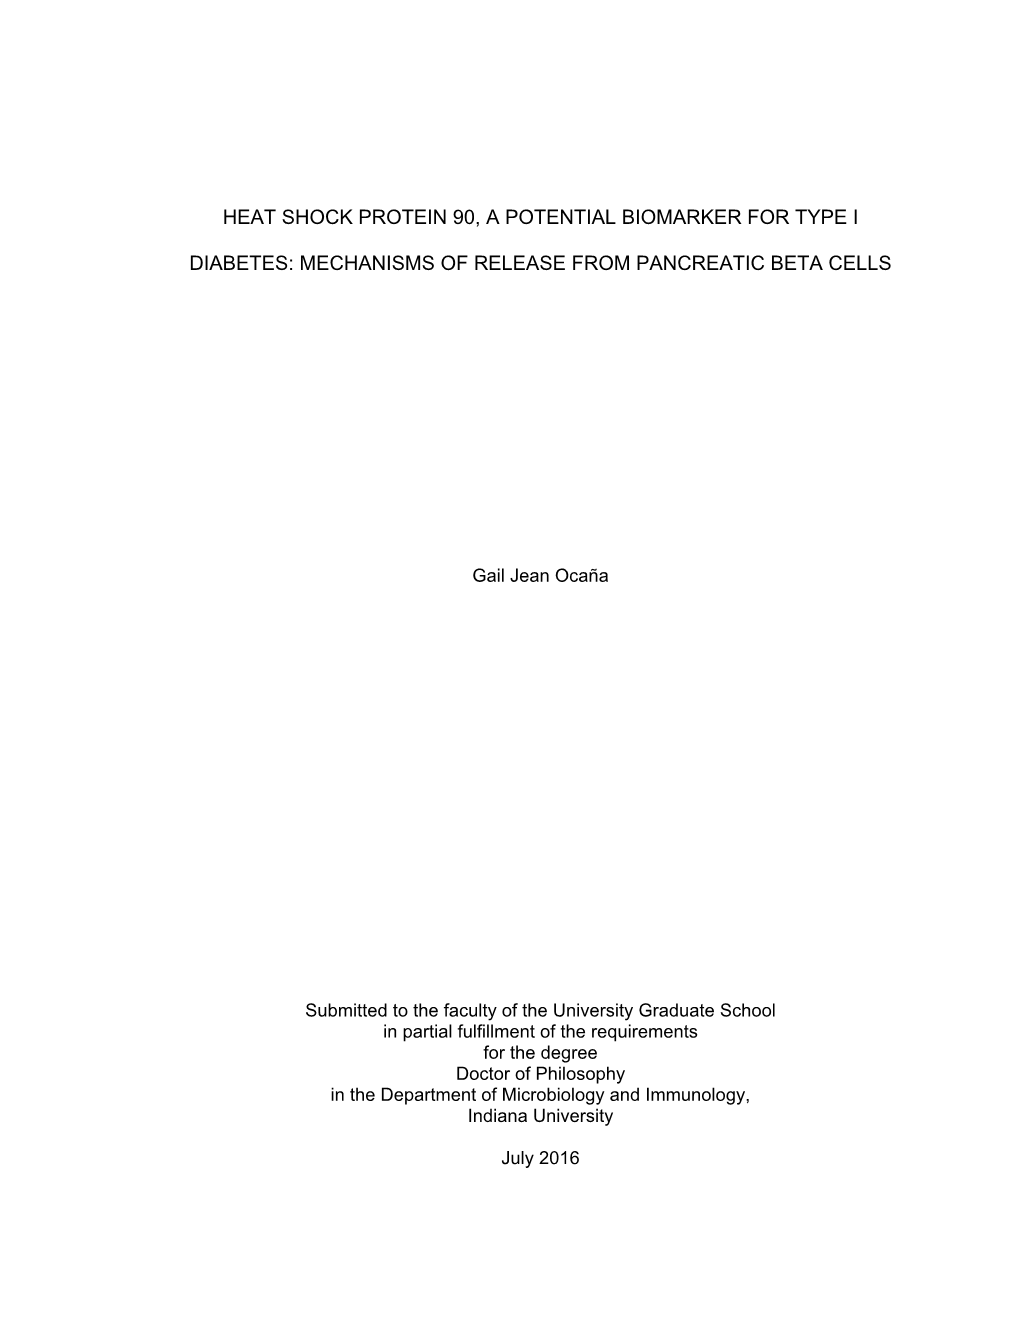 Heat Shock Protein 90, a Potential Biomarker for Type I